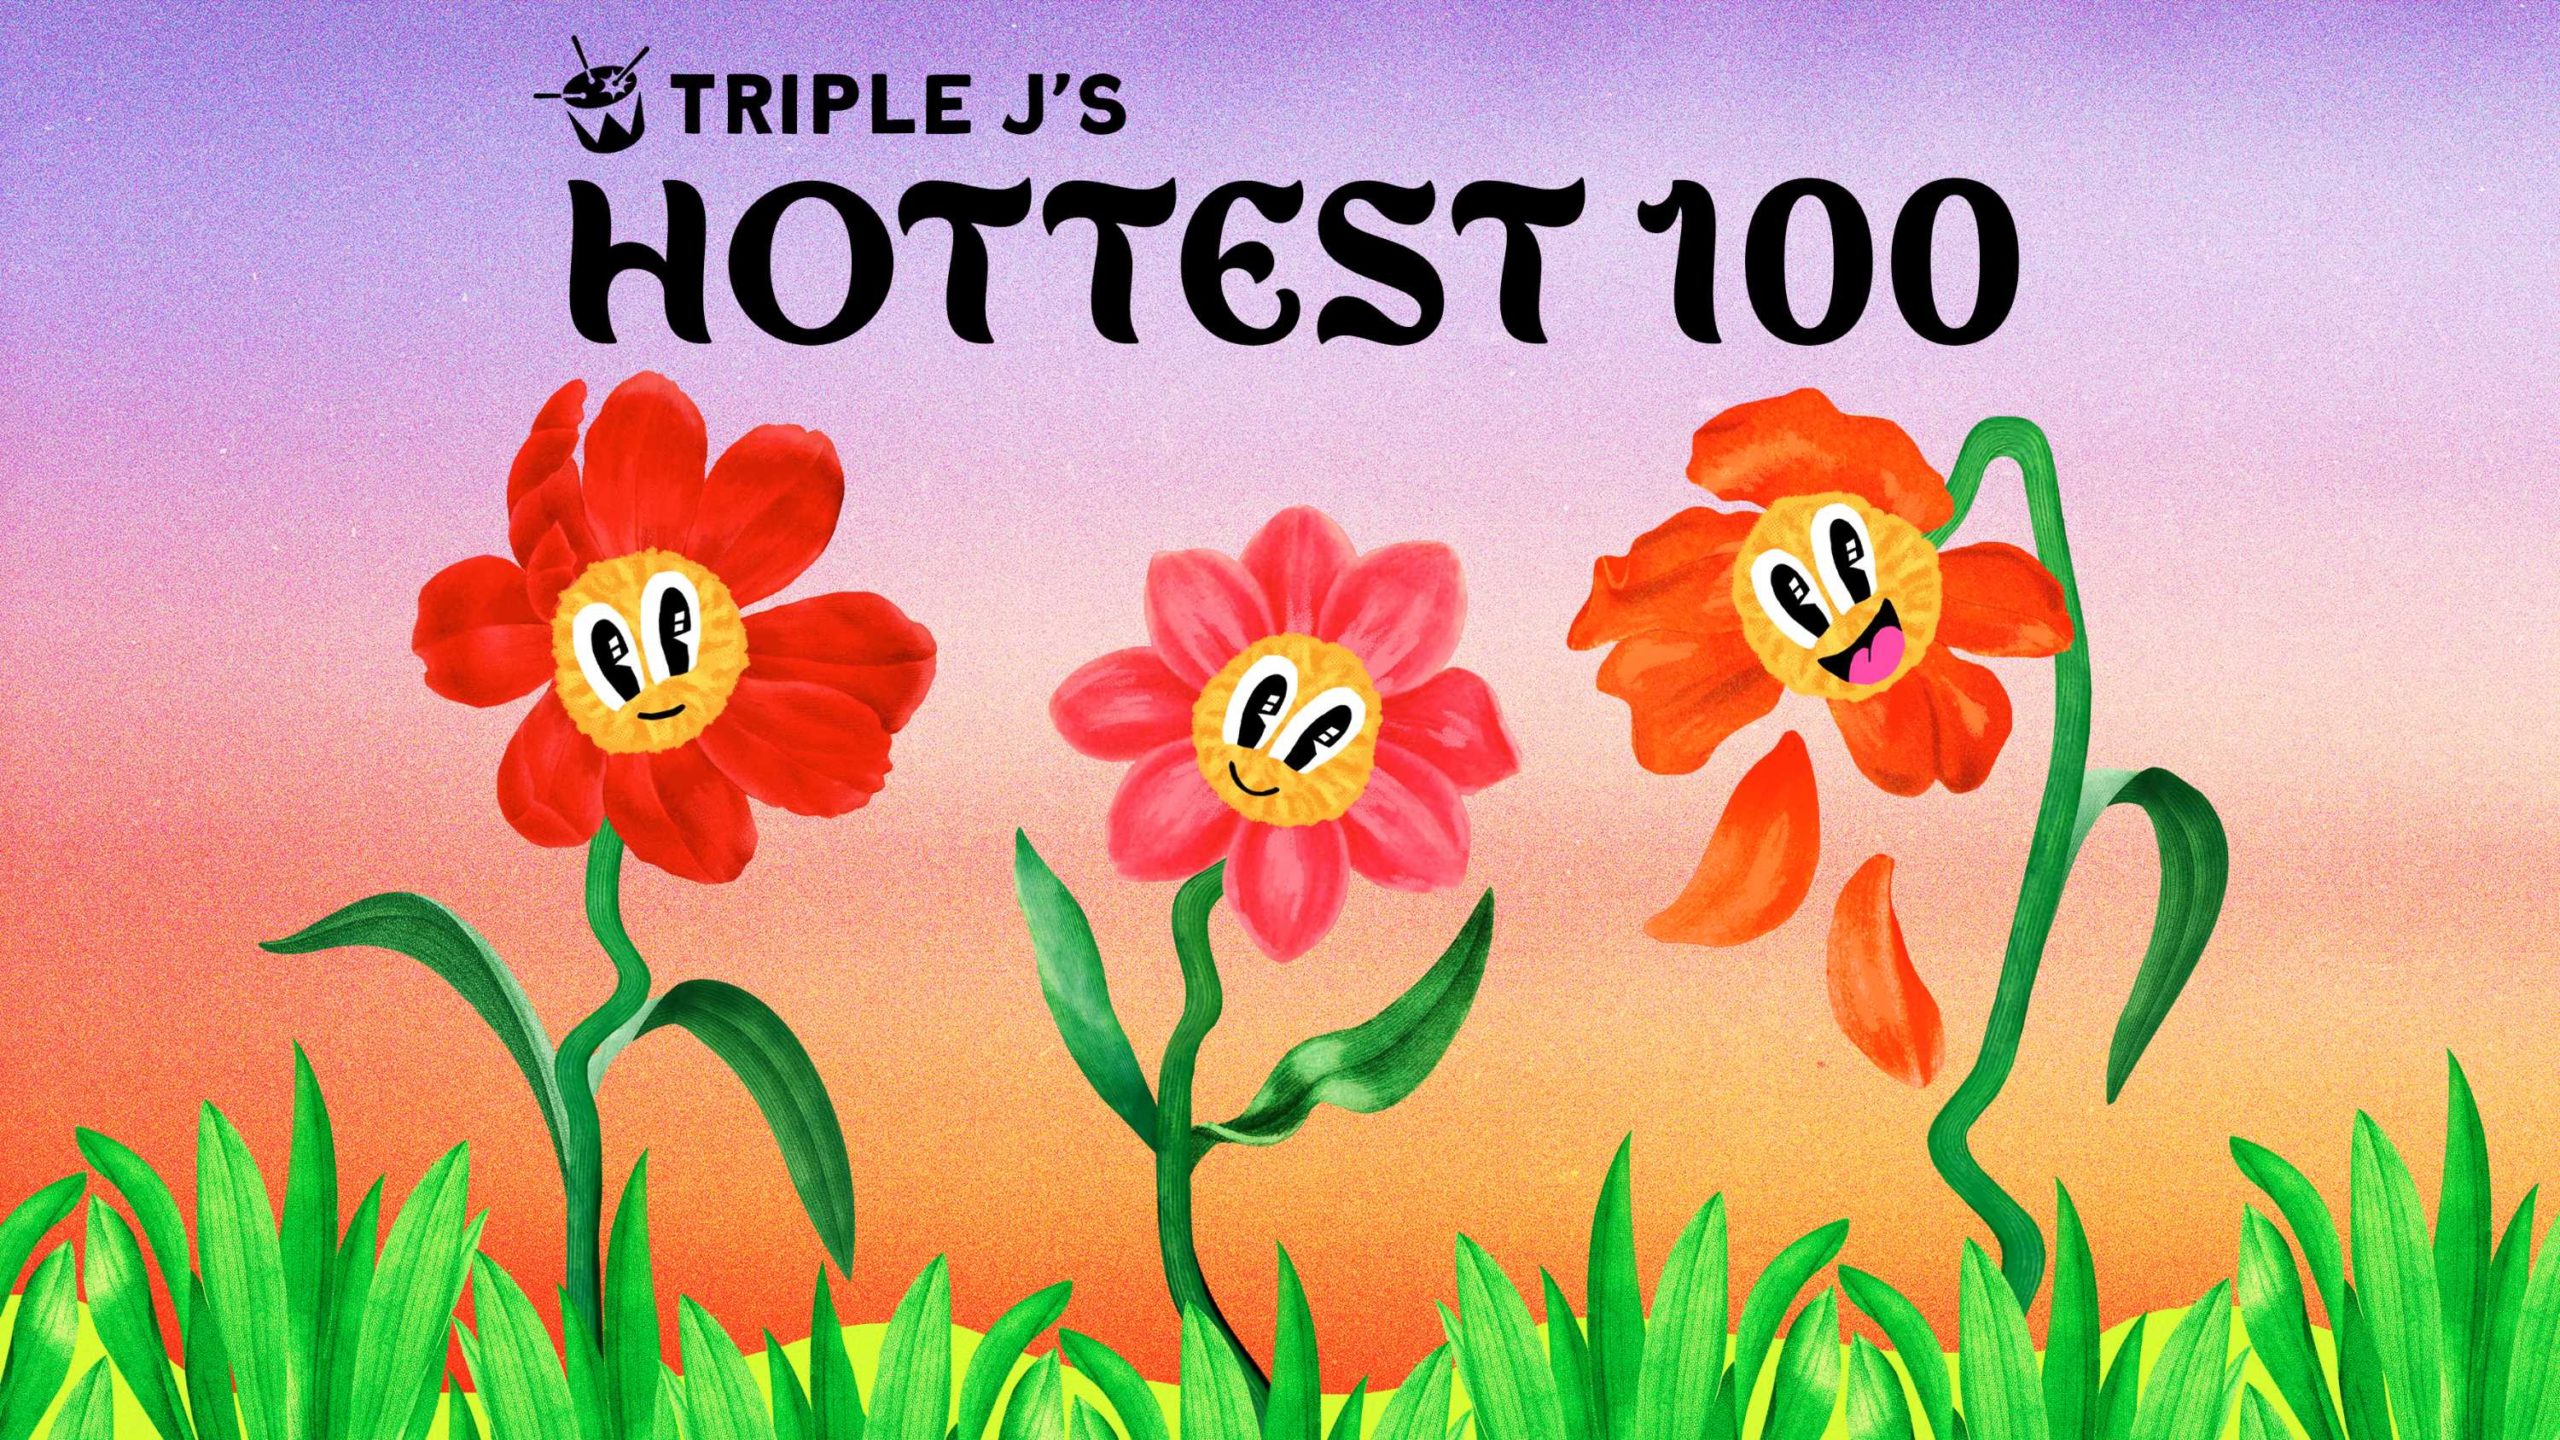 My Top 10 Songs for Triple J’s 2021 Hottest 100